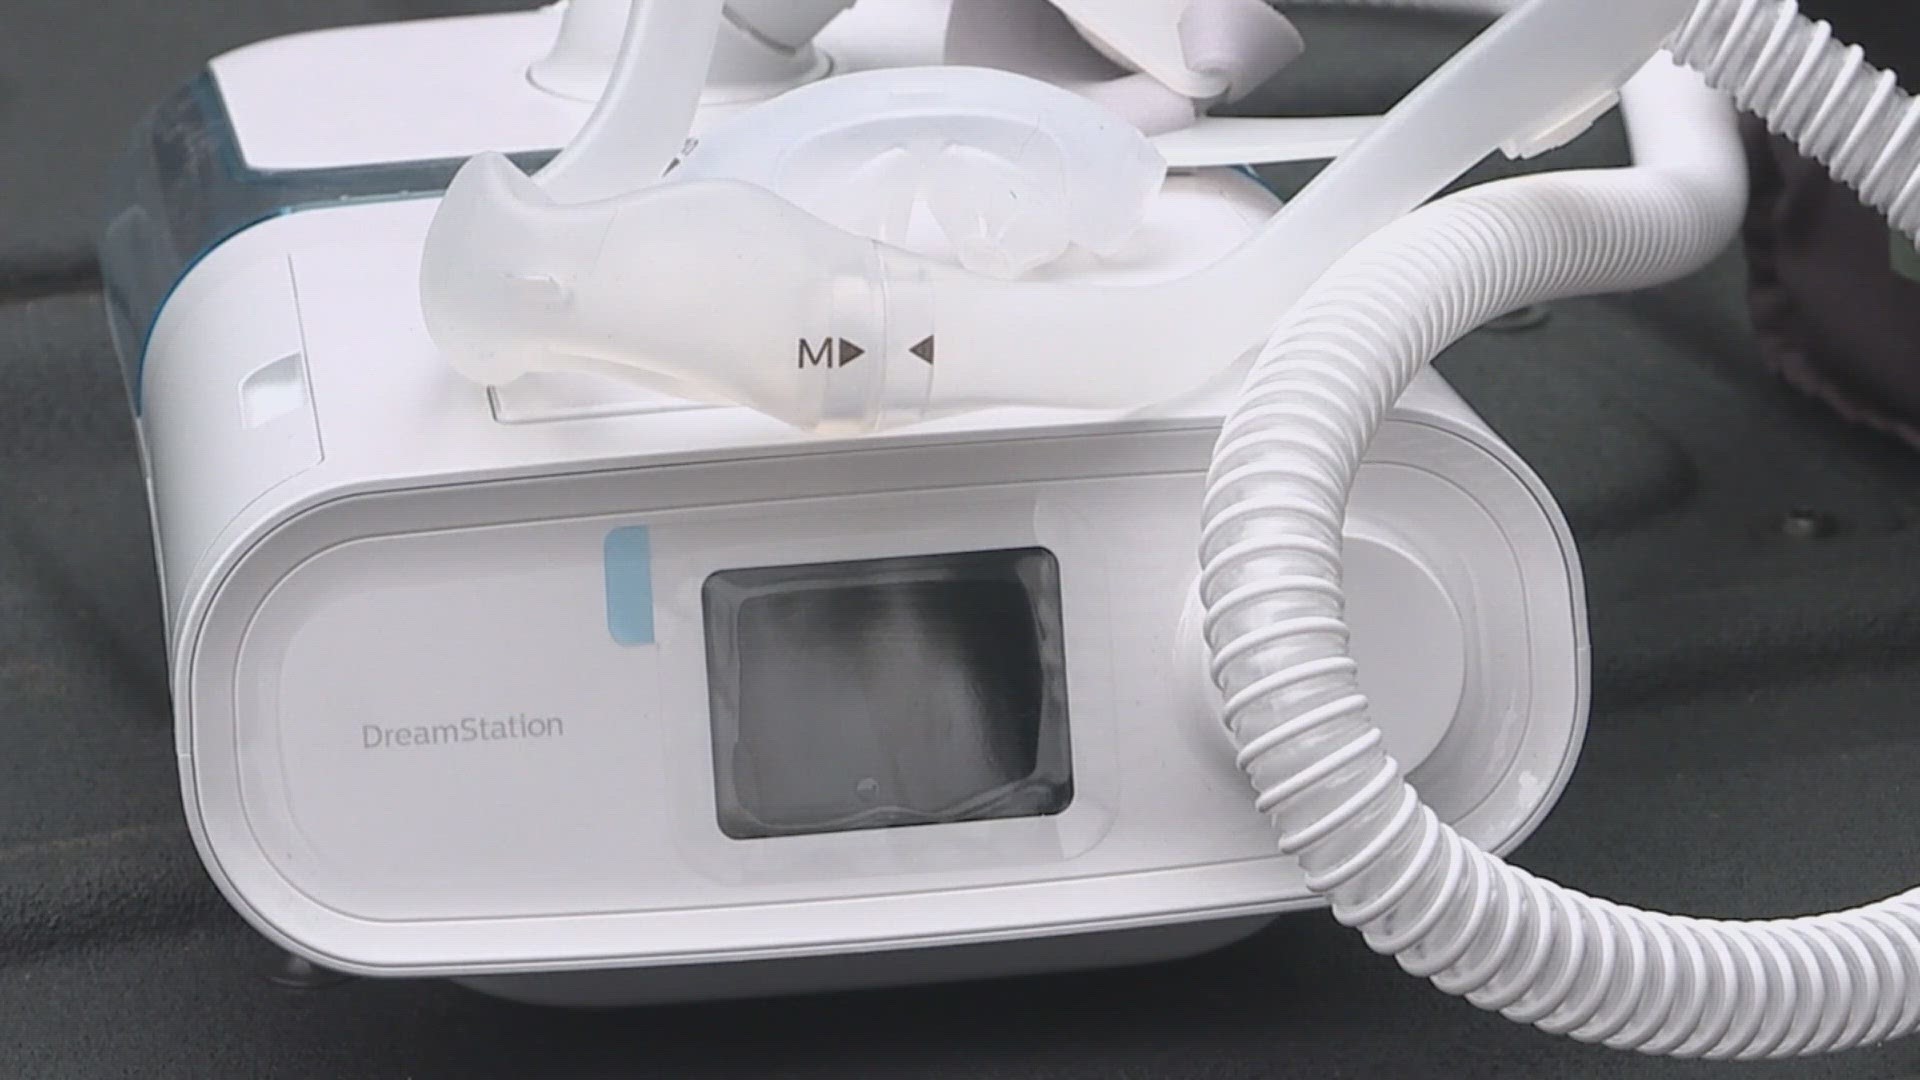 USA Today says the company recalled of breathing devices and ventilators globally due to health concerns.